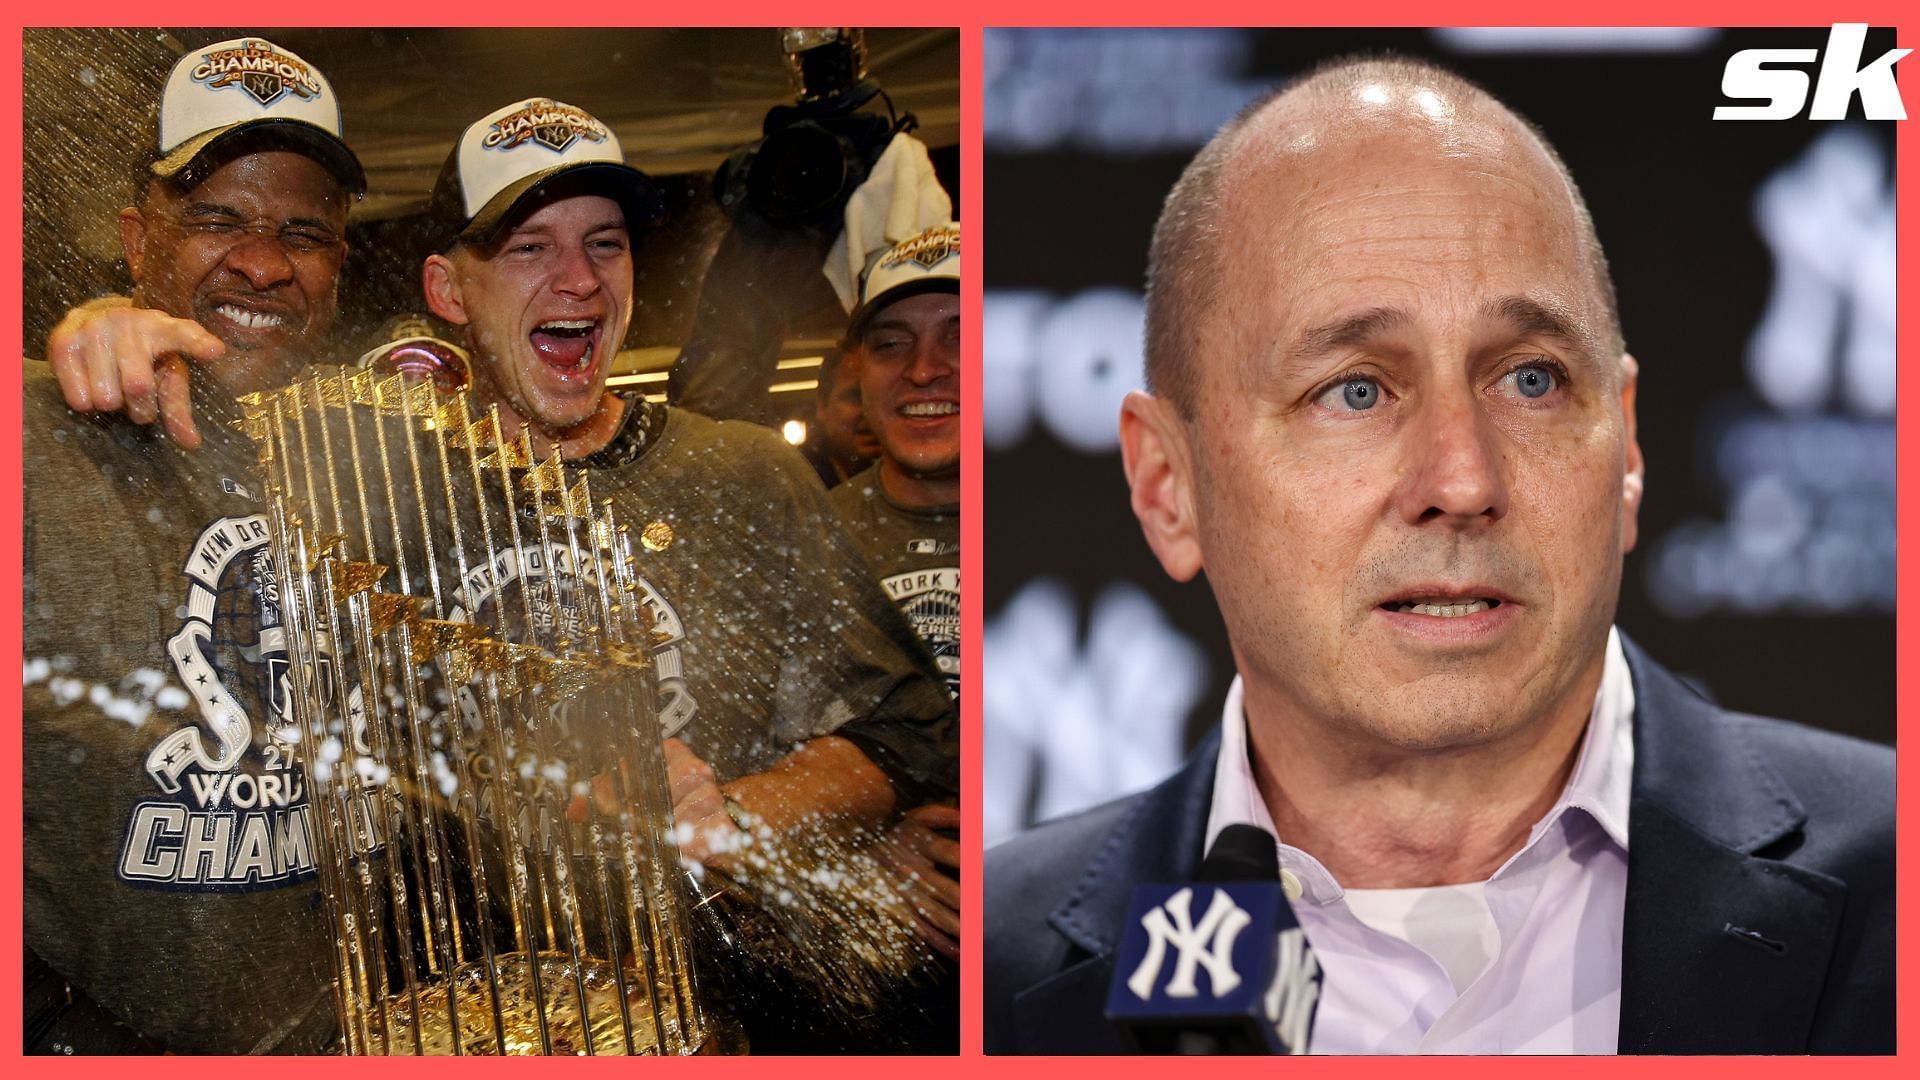 Yankees GM Brian Cashman has done enough to earn a Hall of Fame induction, according to popular radio duo BT and Sal.